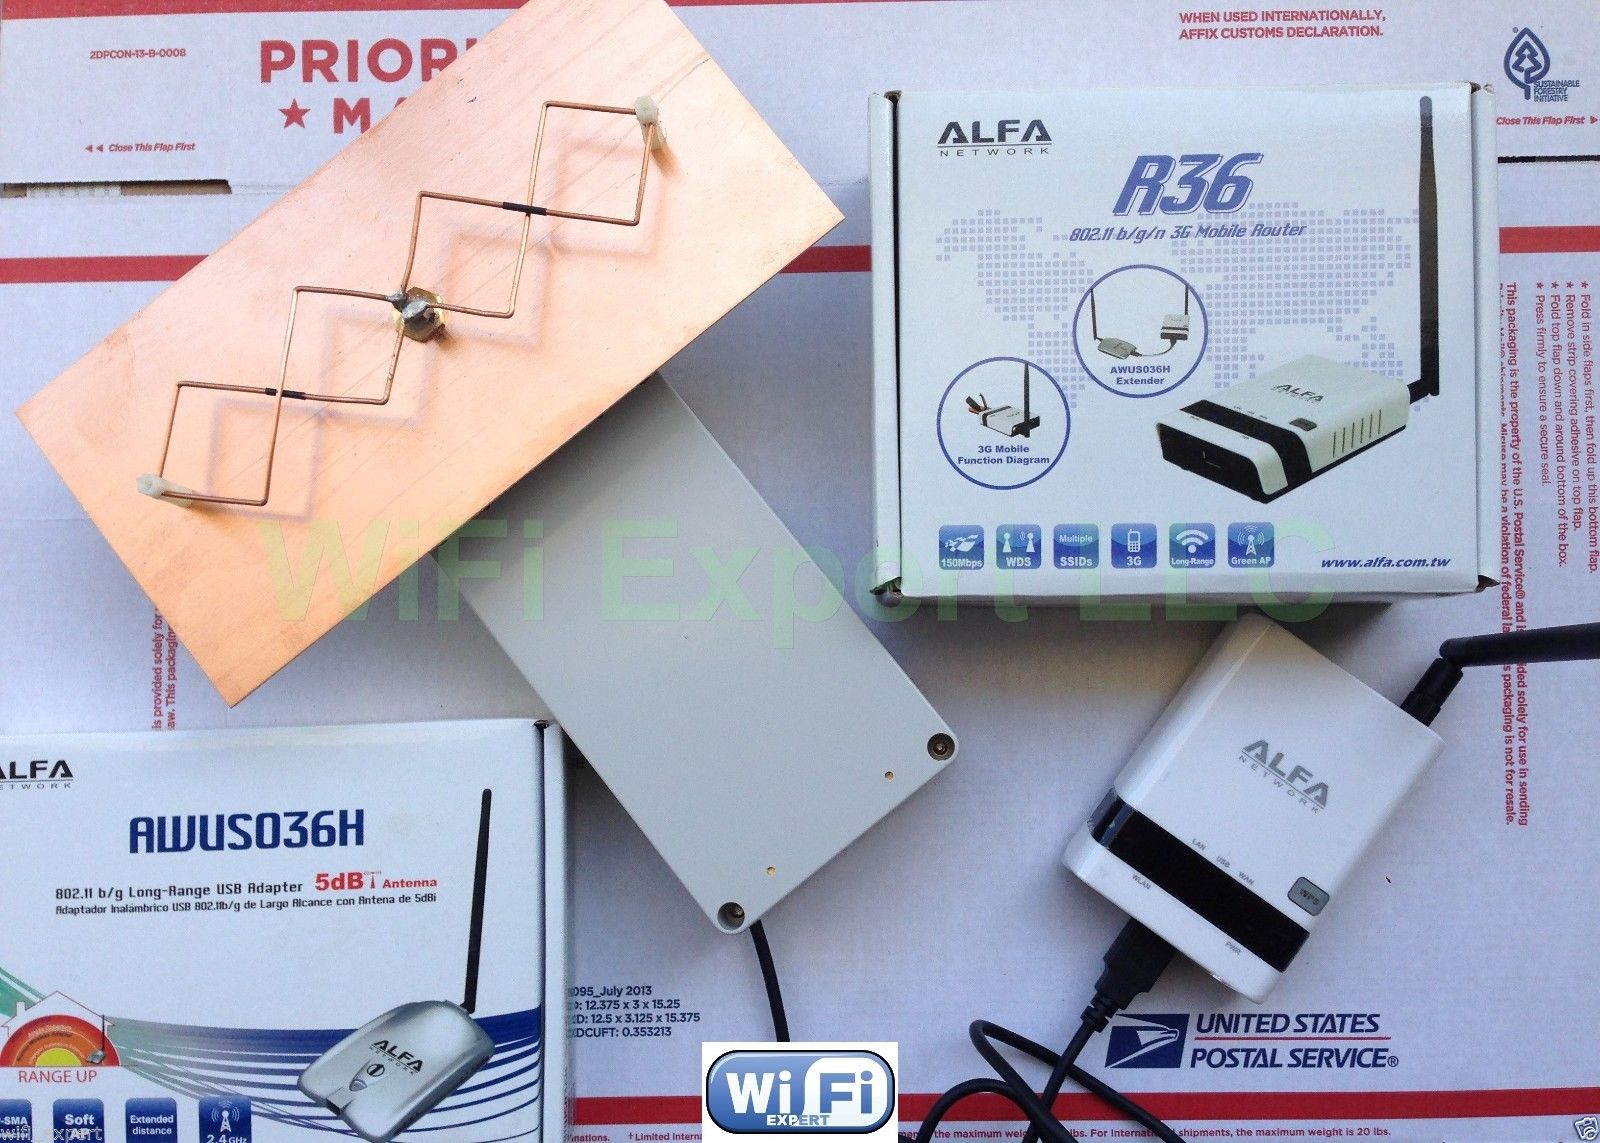 alias recept vliegtuig WiFi Antenna ALFA R36 + G OUTDOOR 8M Double Biquad Long Range GET FREE  INTERNET – RF Coaxial Cables, Adapters, Connectors, Antennas, router mod  kits, ham radio products, Alfa and cellphone boosters